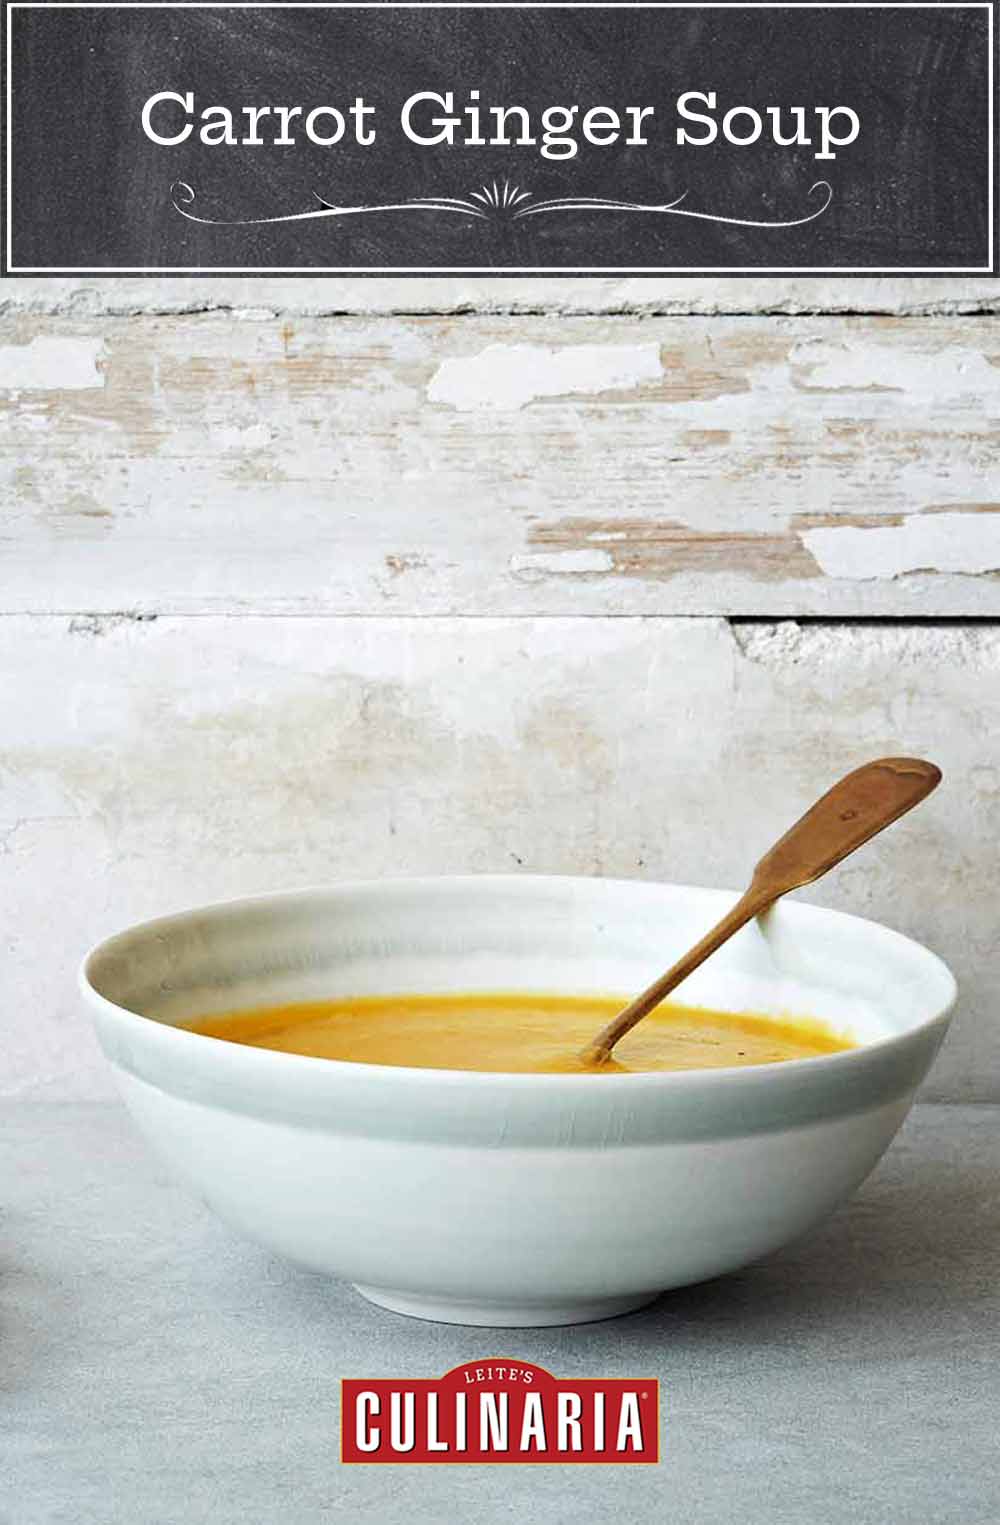 A white bowl filled with carrot ginger soup, with a spoon resting inside and a plate of carrots beside it.